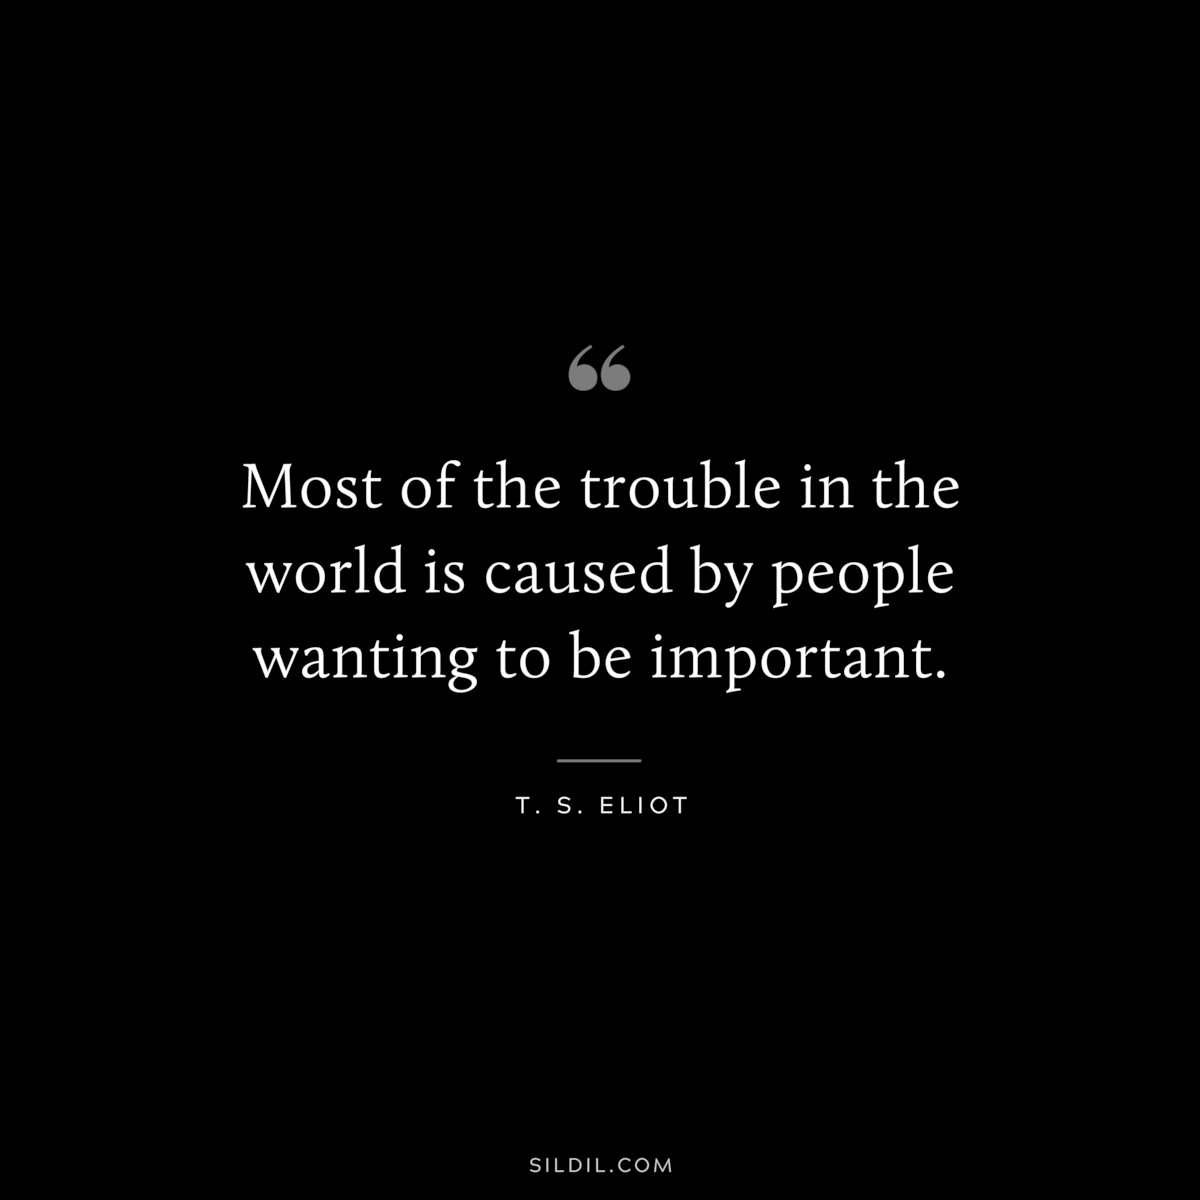 Most of the trouble in the world is caused by people wanting to be important. ― T. S. Eliot